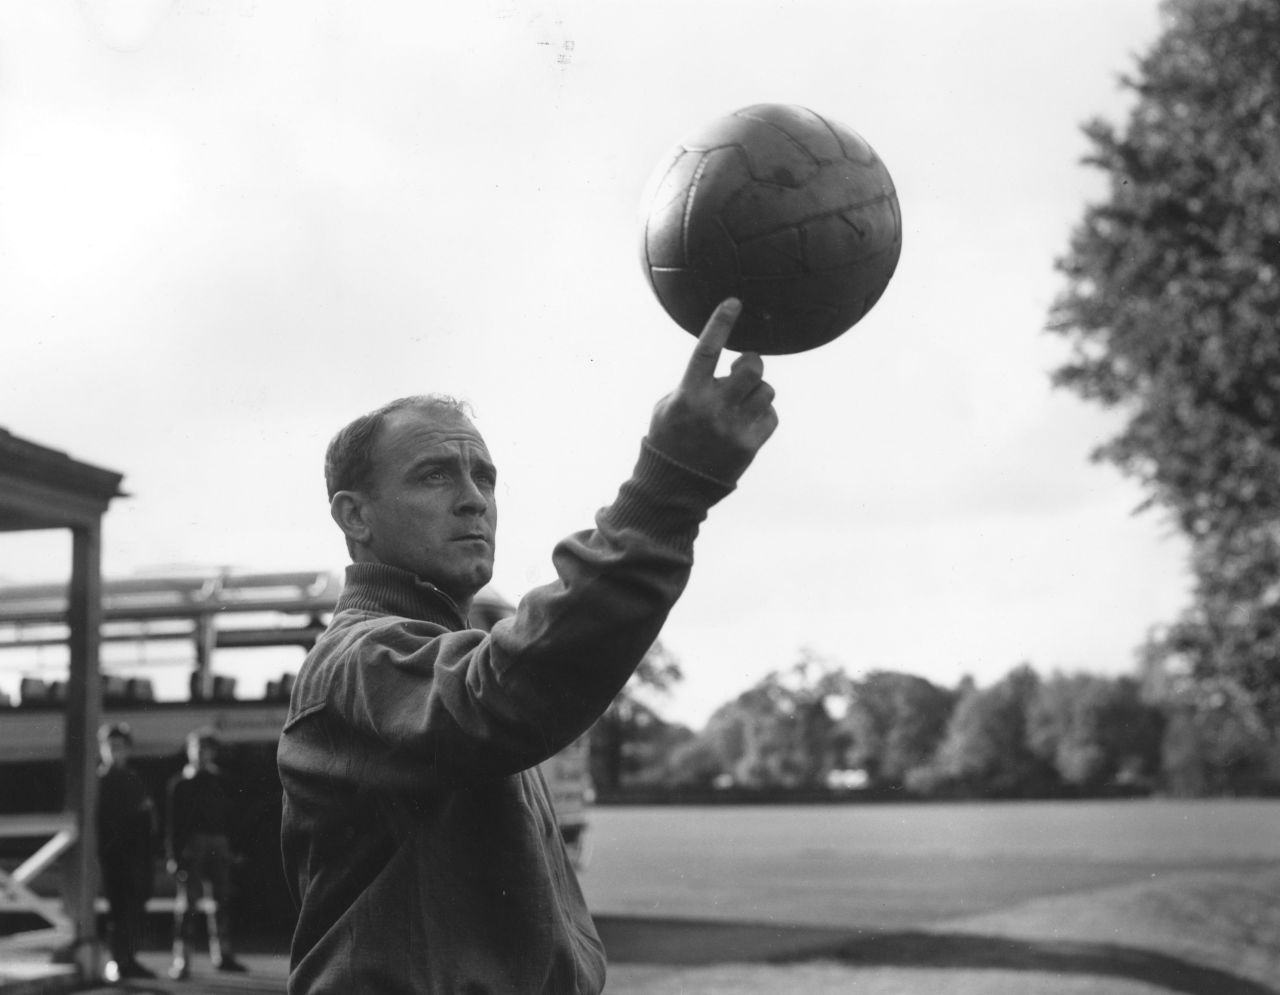 Former Real Madrid star Alfredo di Stefano, one of the world's greatest forwards, spinning a ball in October 1960 during a practice in England. Di Stefano died at the age of 88 on Monday after suffering a heart attack near Madrid's Benabeu Stadium.